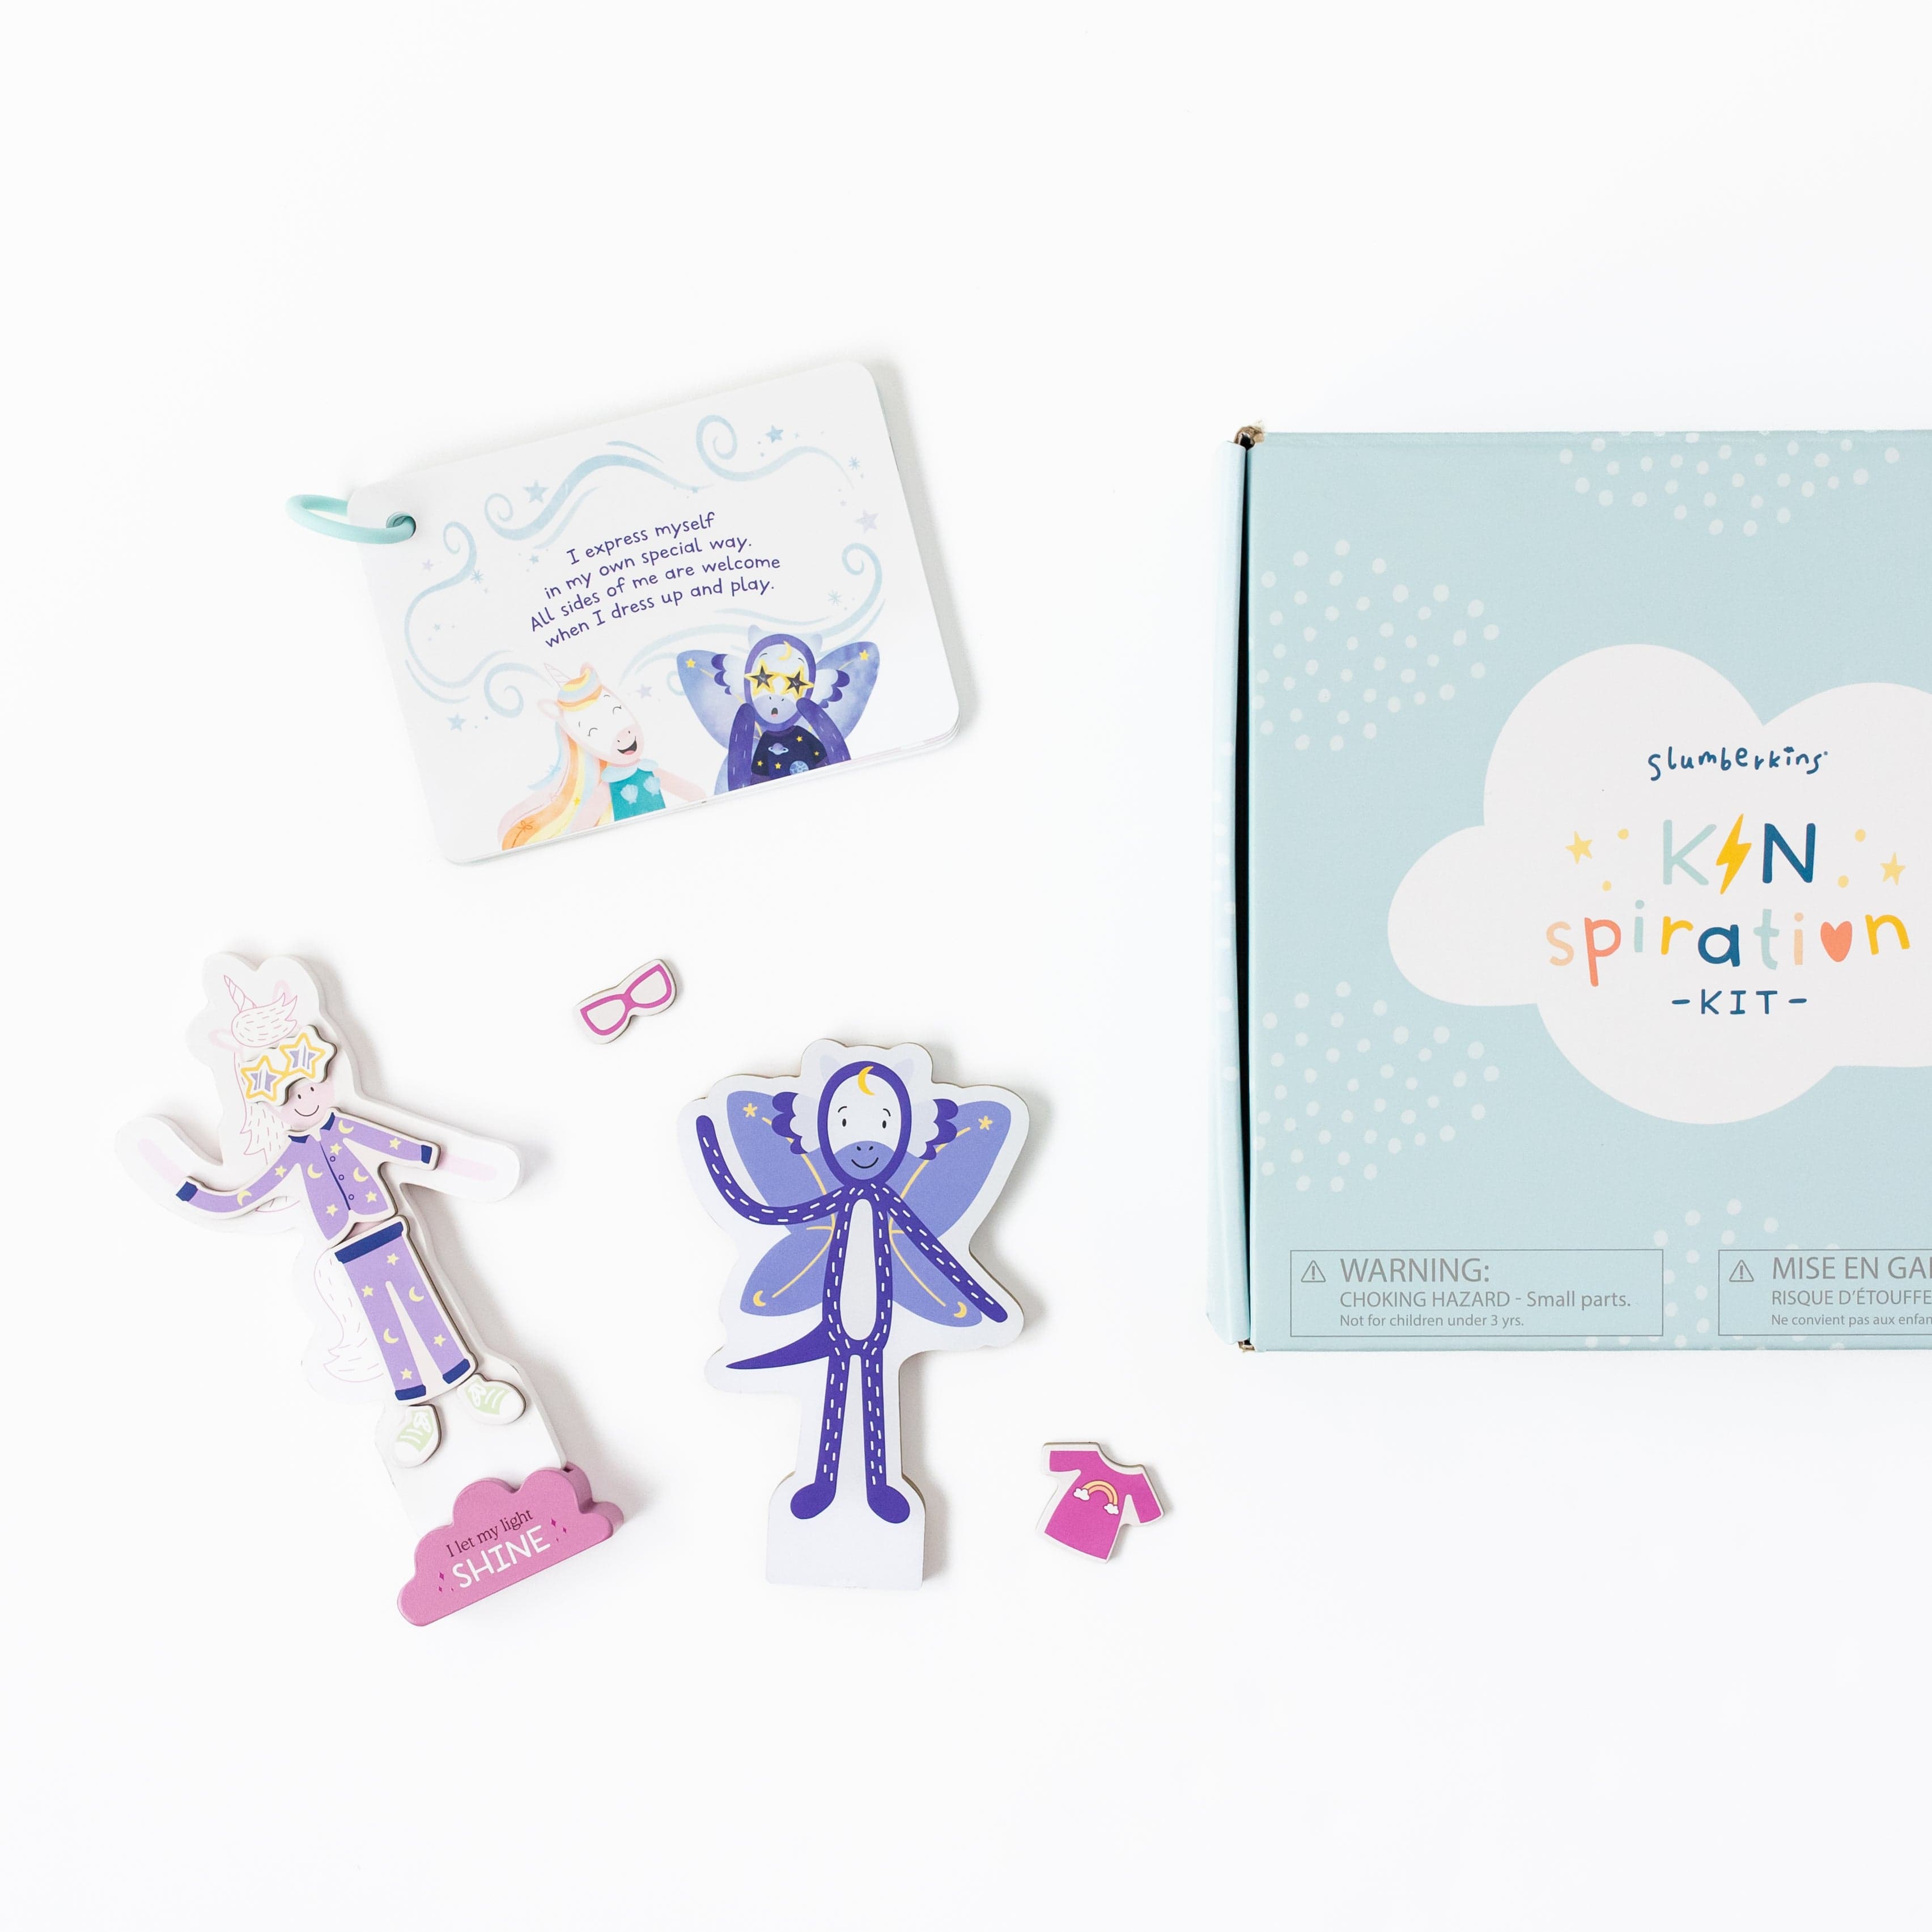 Kit 2: Expressive Play with Unicorn and Dragon - View Product